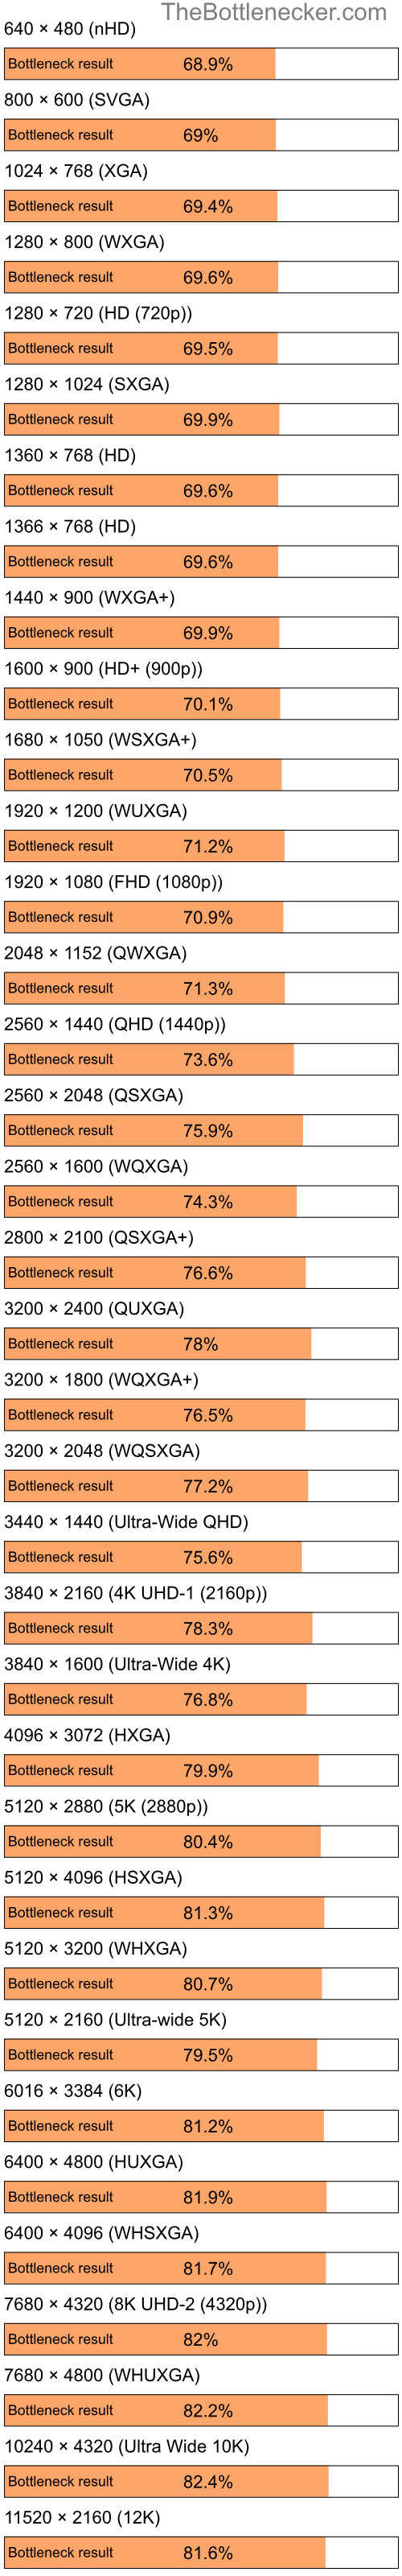 Bottleneck results by resolution for Intel Celeron and AMD Mobility Radeon HD 3450 in Graphic Card Intense Tasks